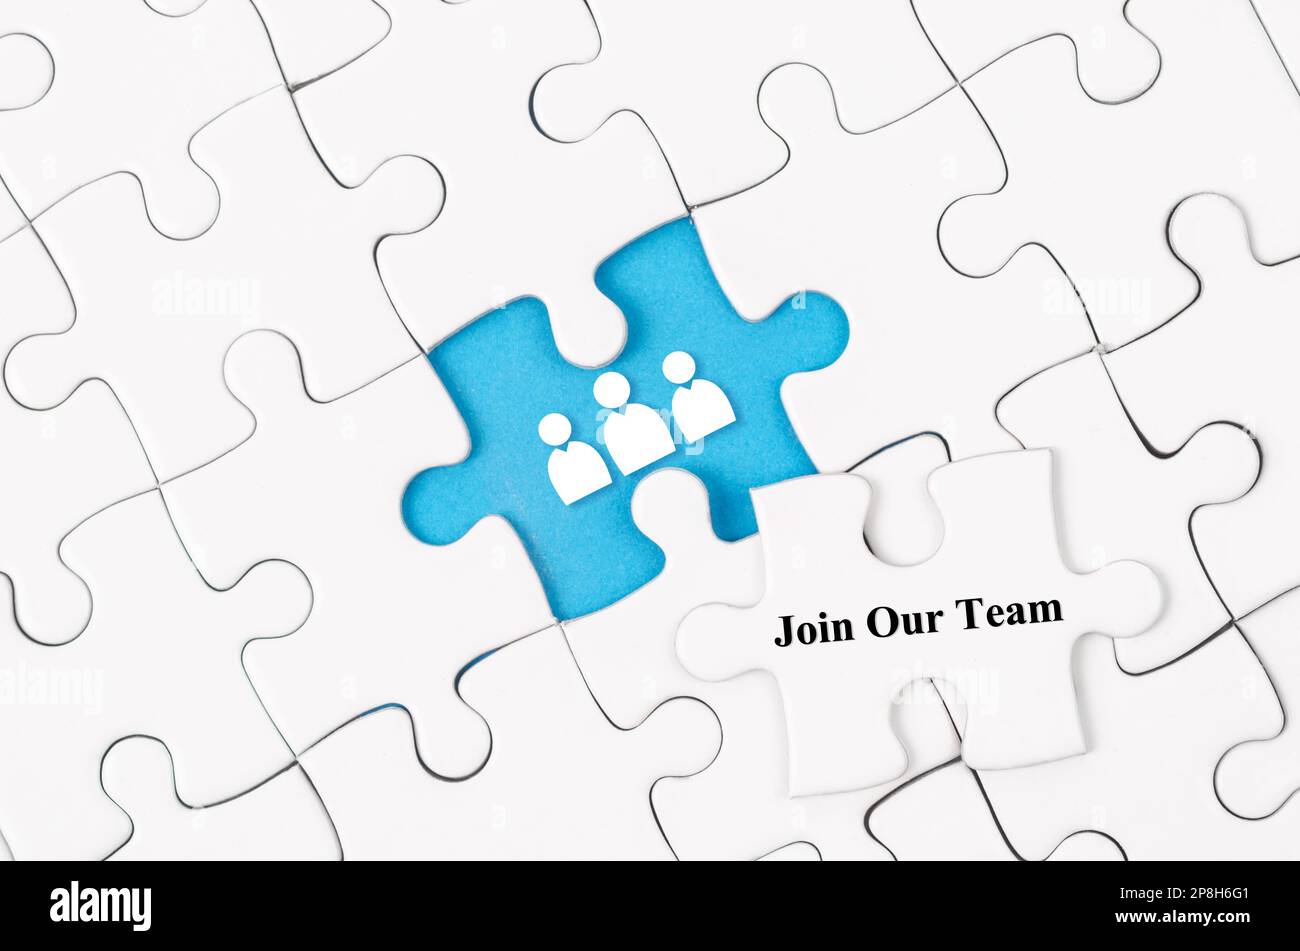 Join our team concept. White jigsaw puzzle with word and blue background Stock Photo